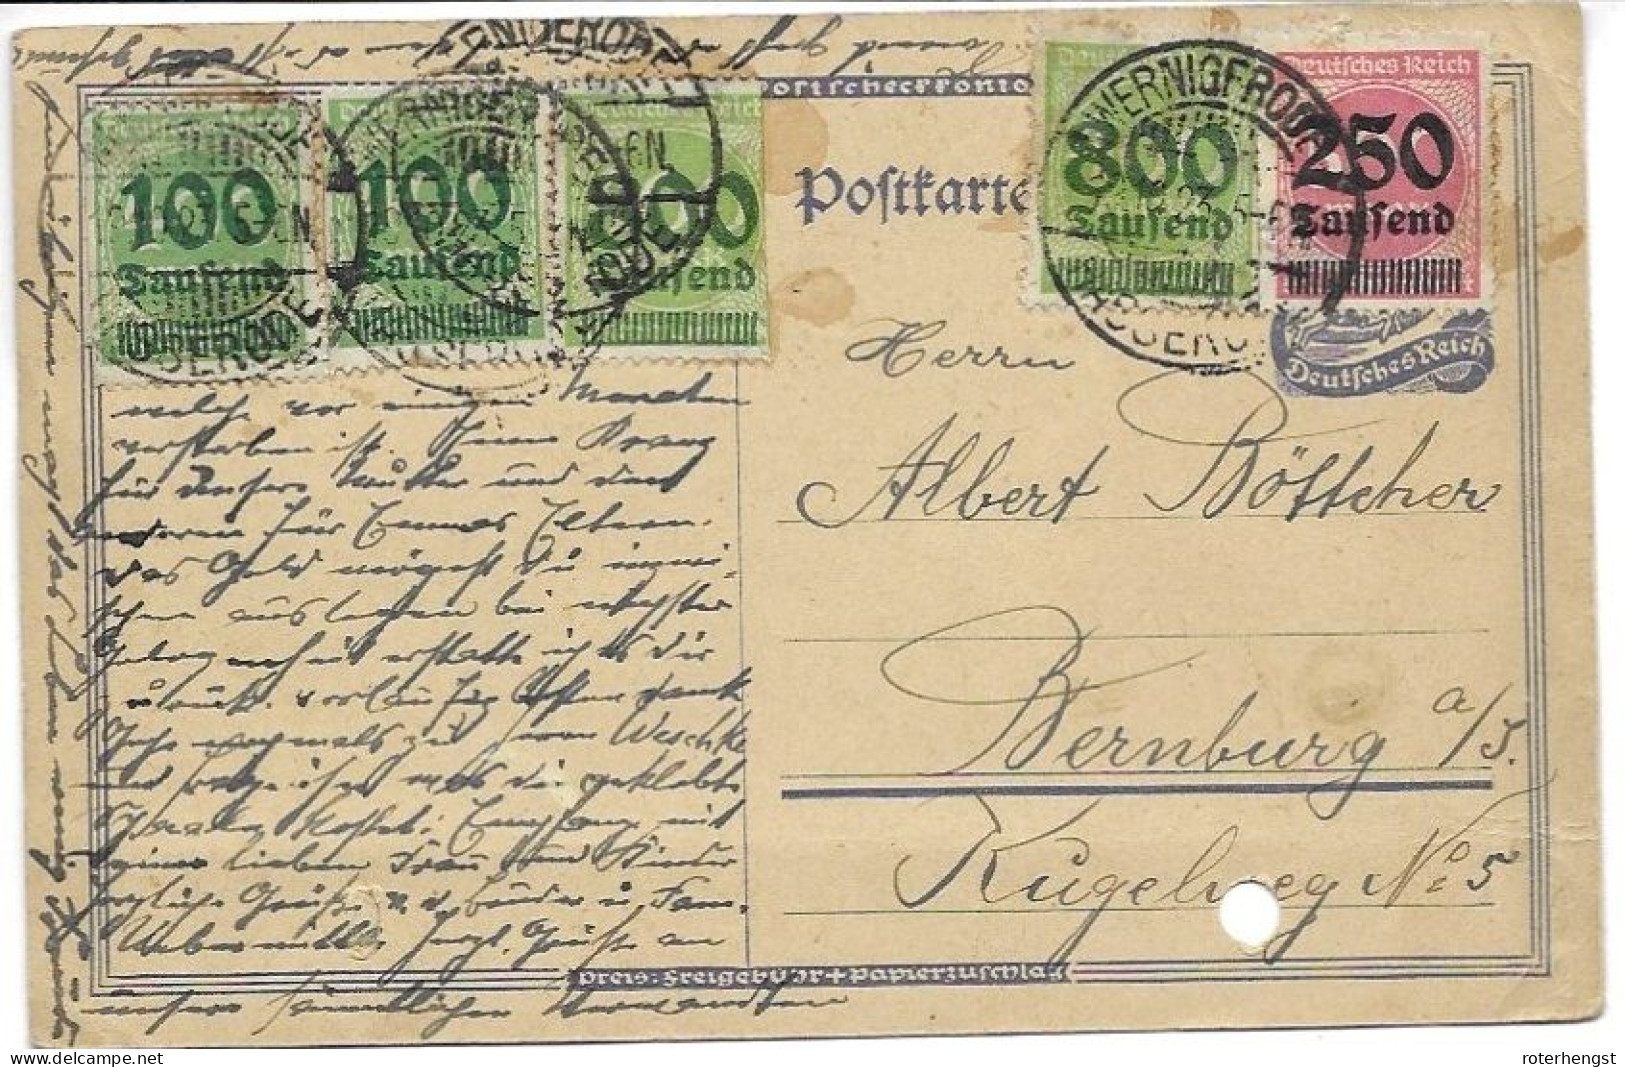 Germany Infla Card Wernigerode 19.10.1923 21 Euros - Covers & Documents